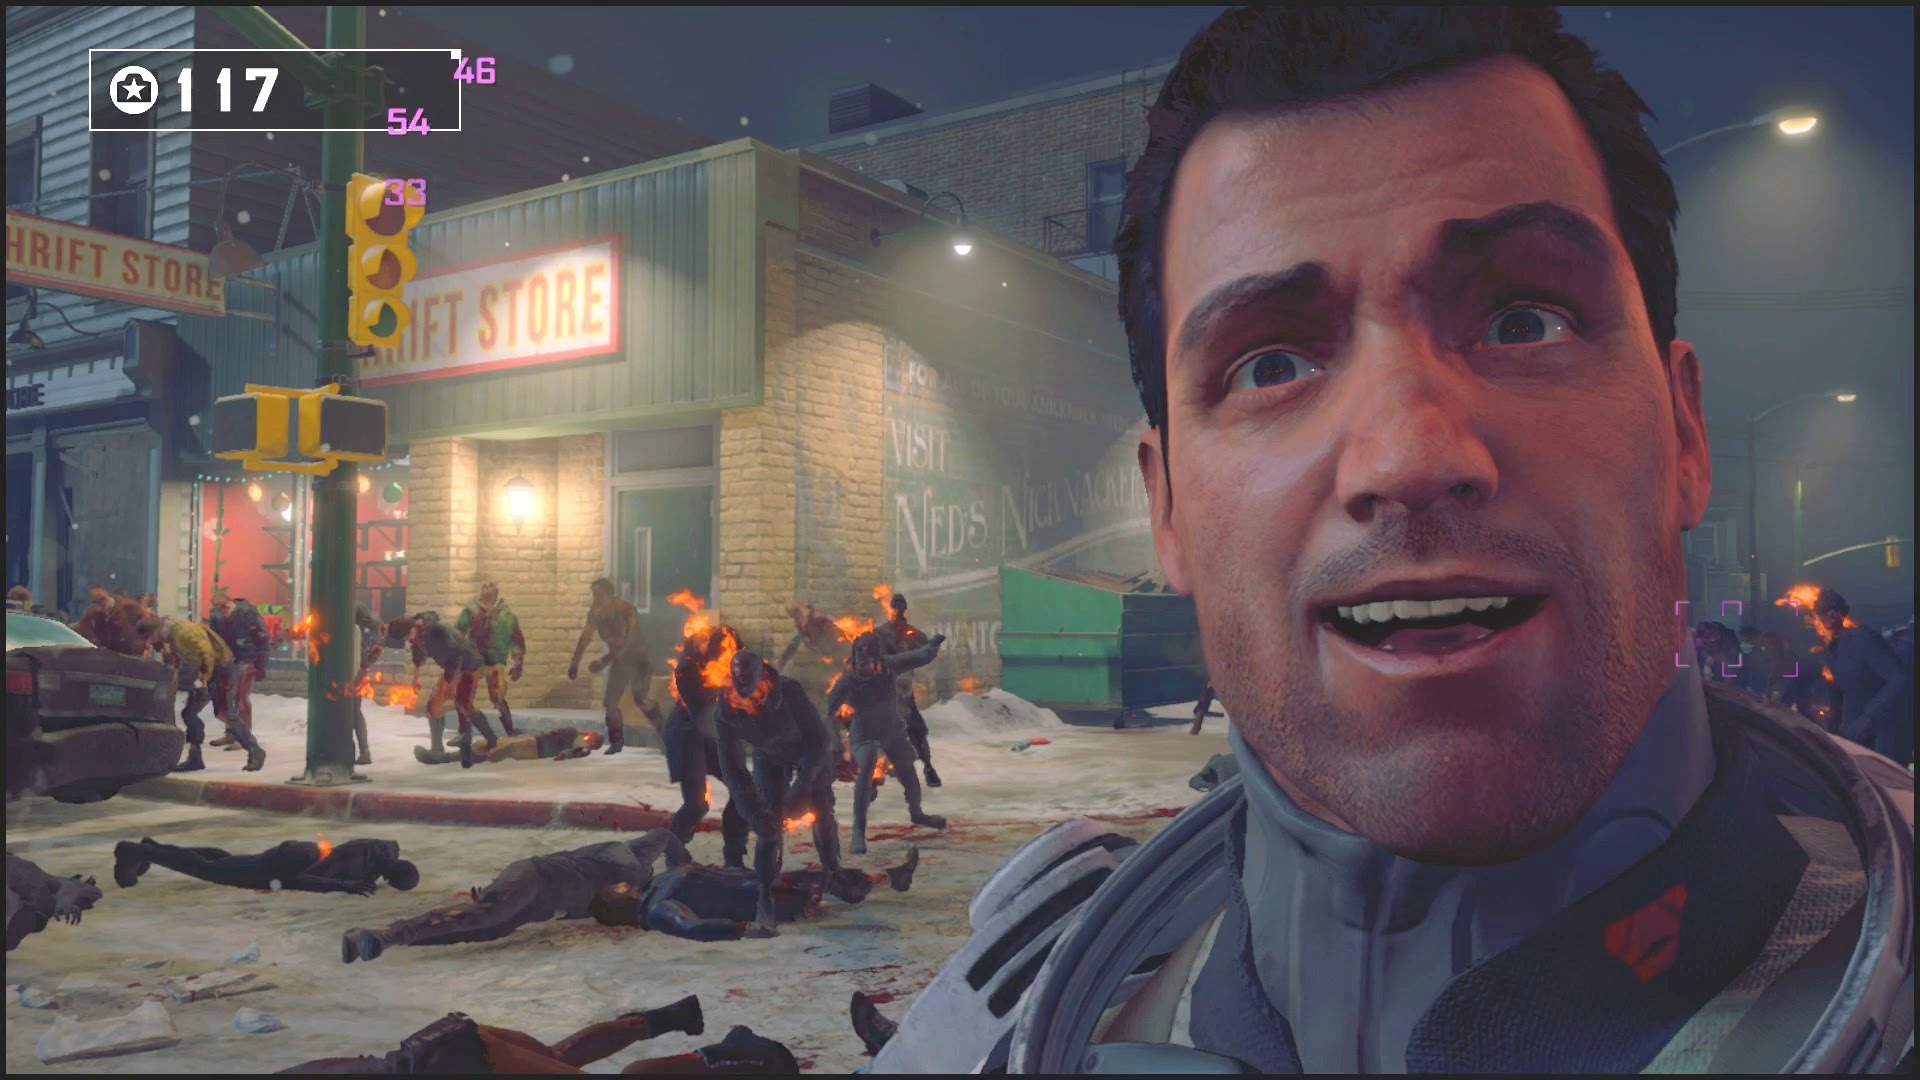 i.TECH - Philippines - Dead Rising (PS4) is now available at i